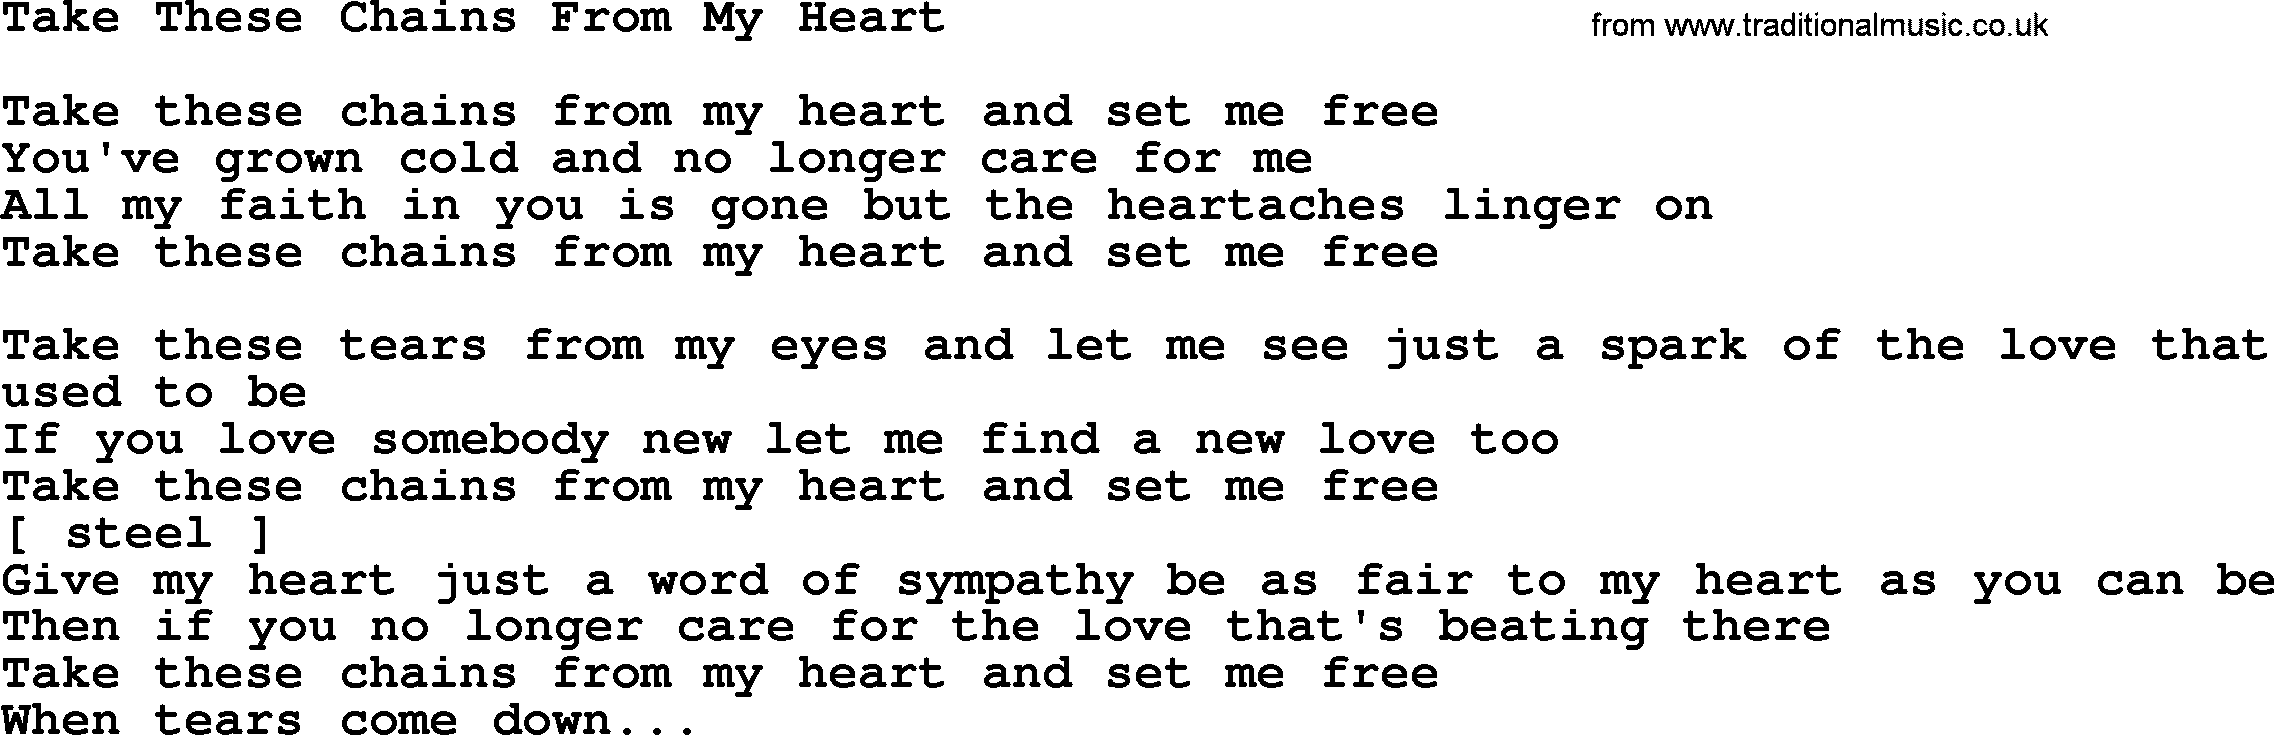 George Jones song: Take These Chains From My Heart, lyrics